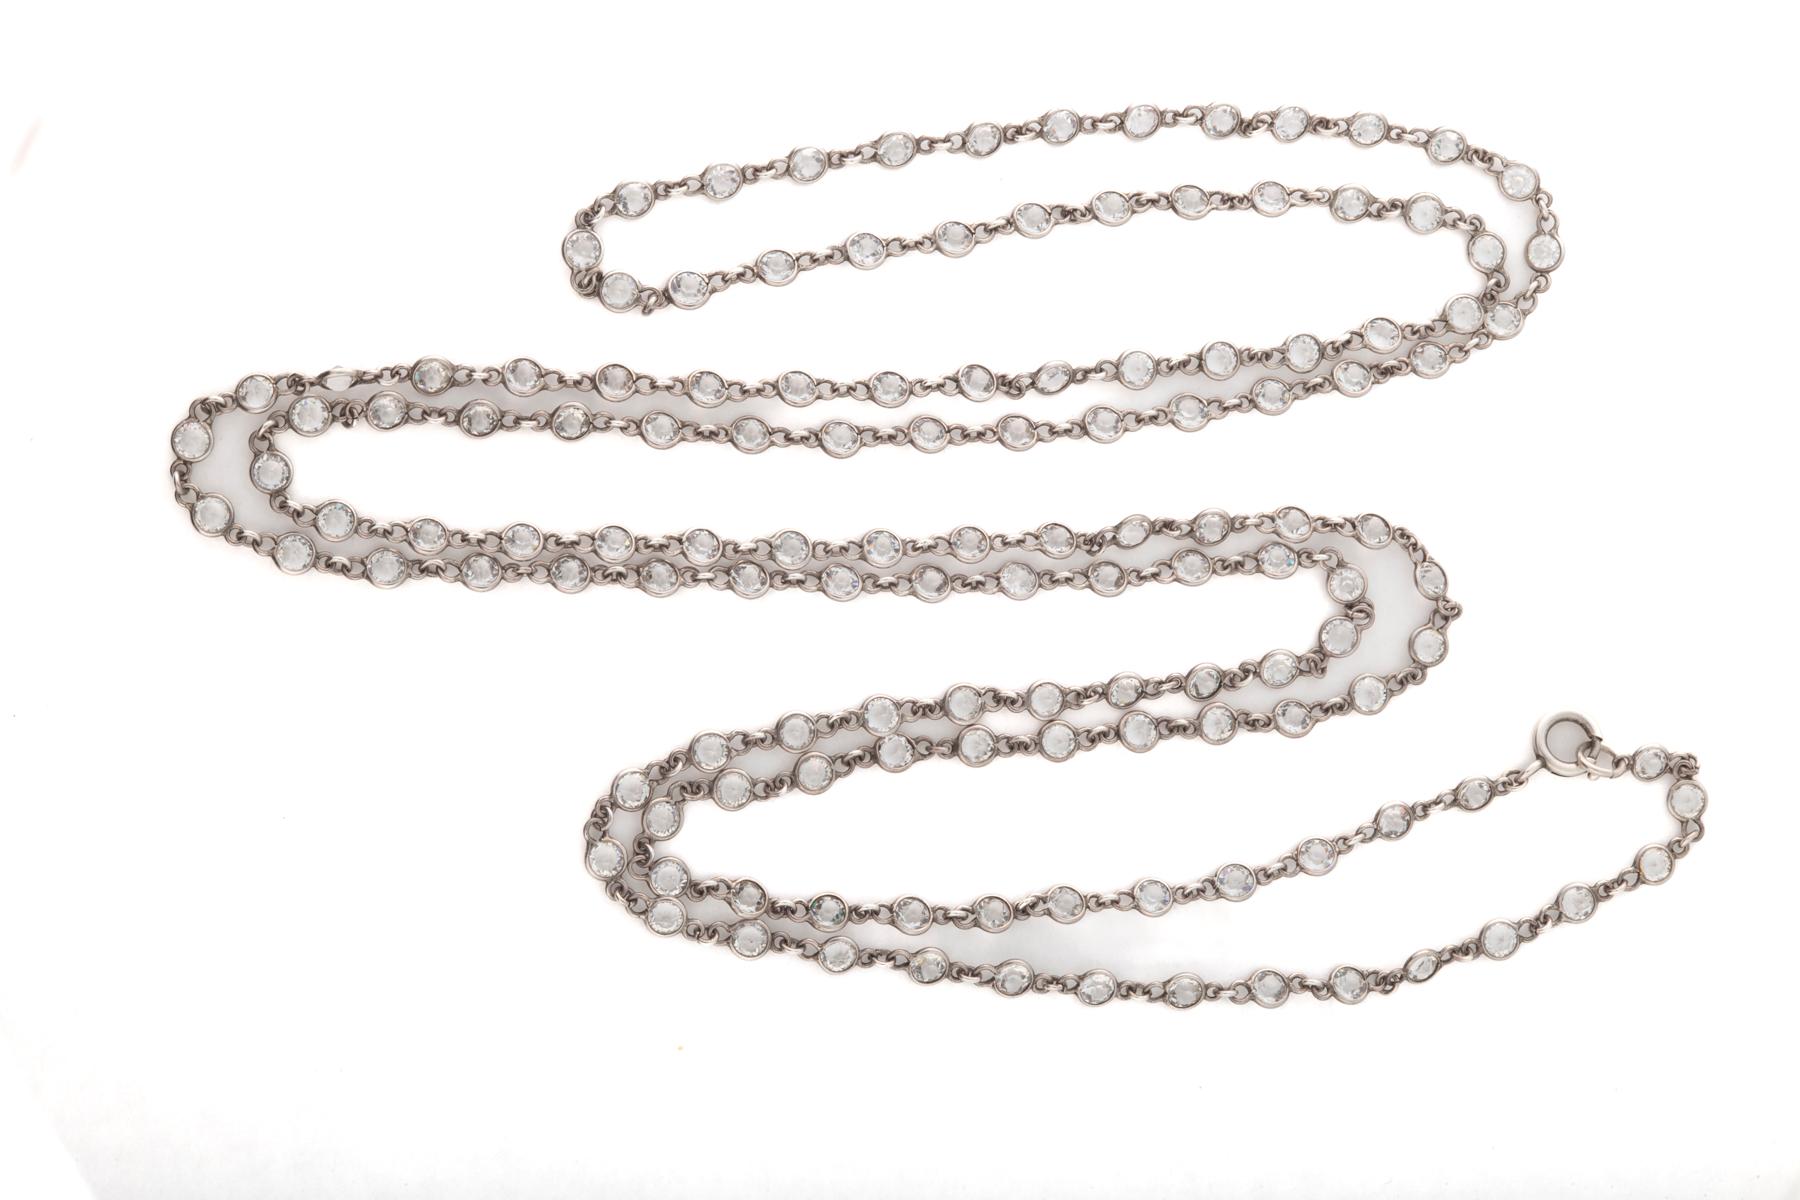 Women's or Men's Vintage 20th Century 62 inch White Topaz Sterling Chain Necklace For Sale